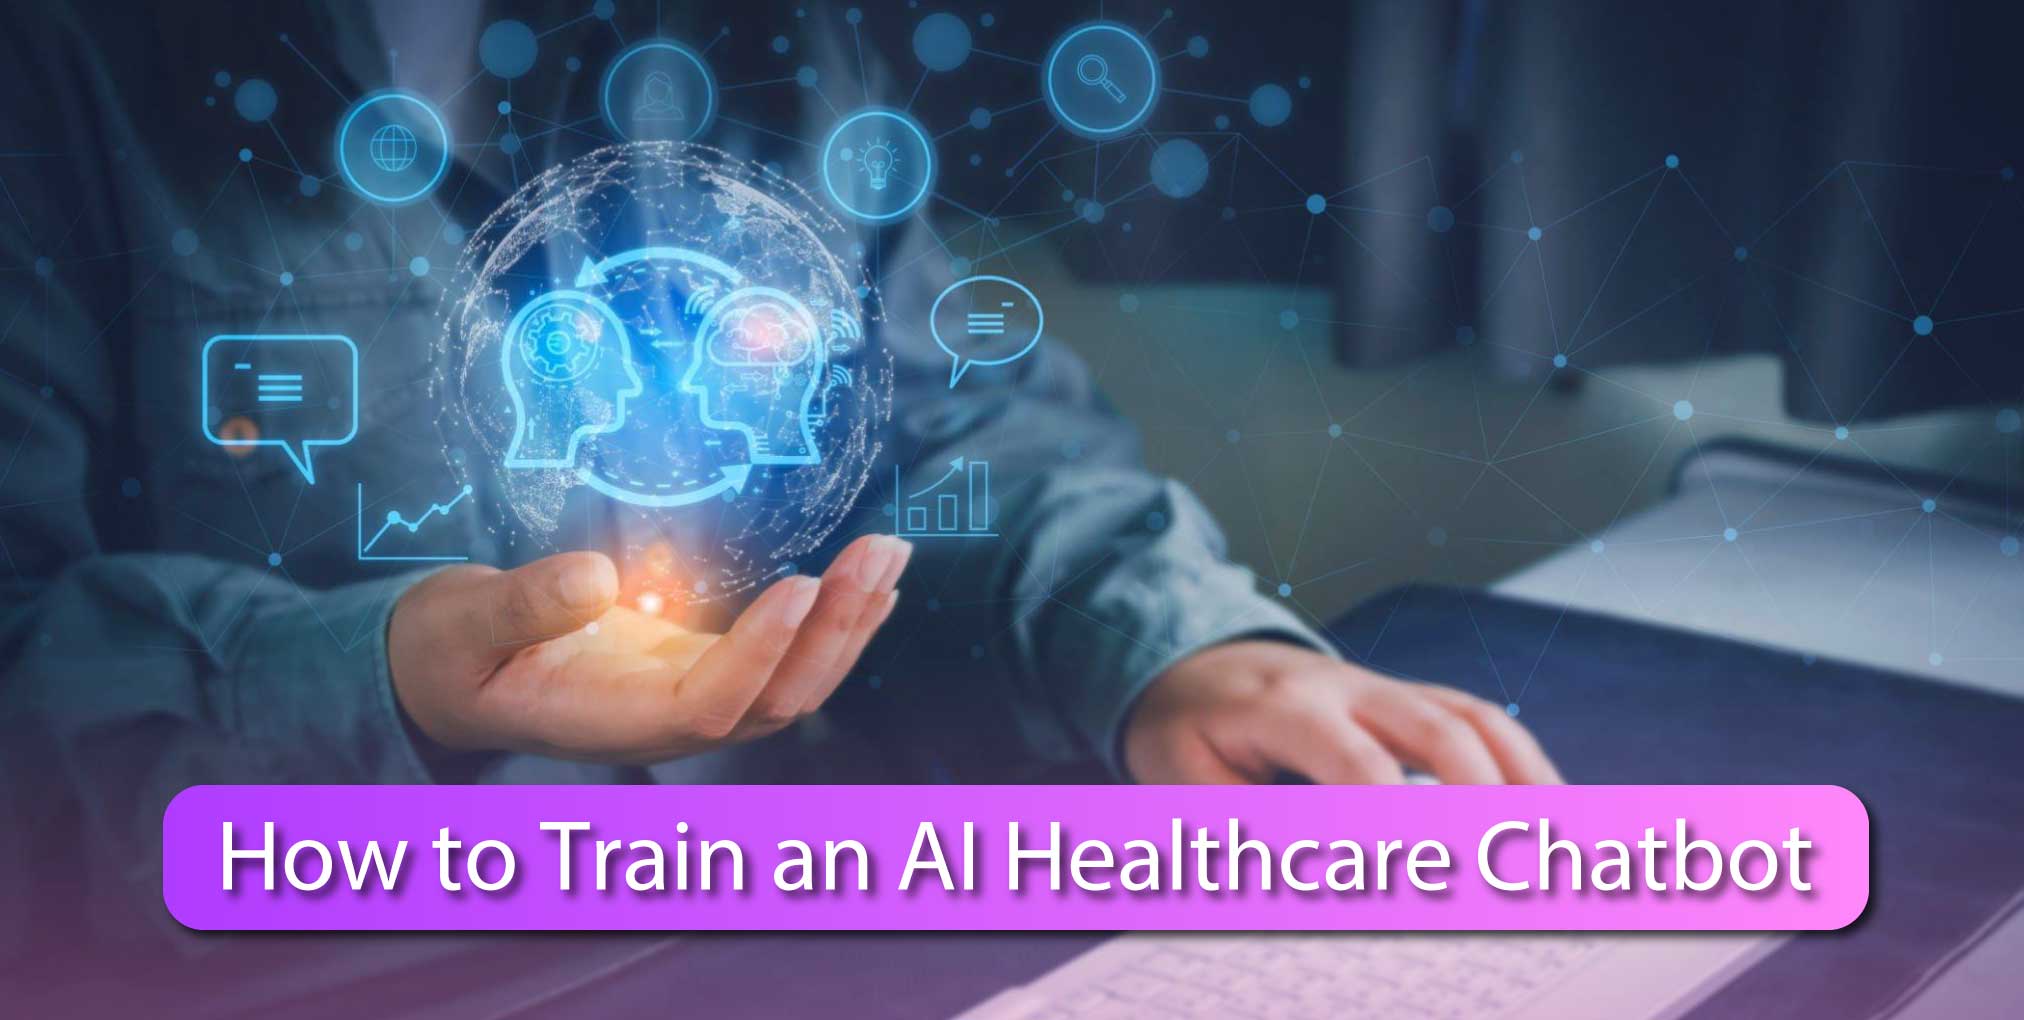 How to Train an AI Healthcare Chatbot